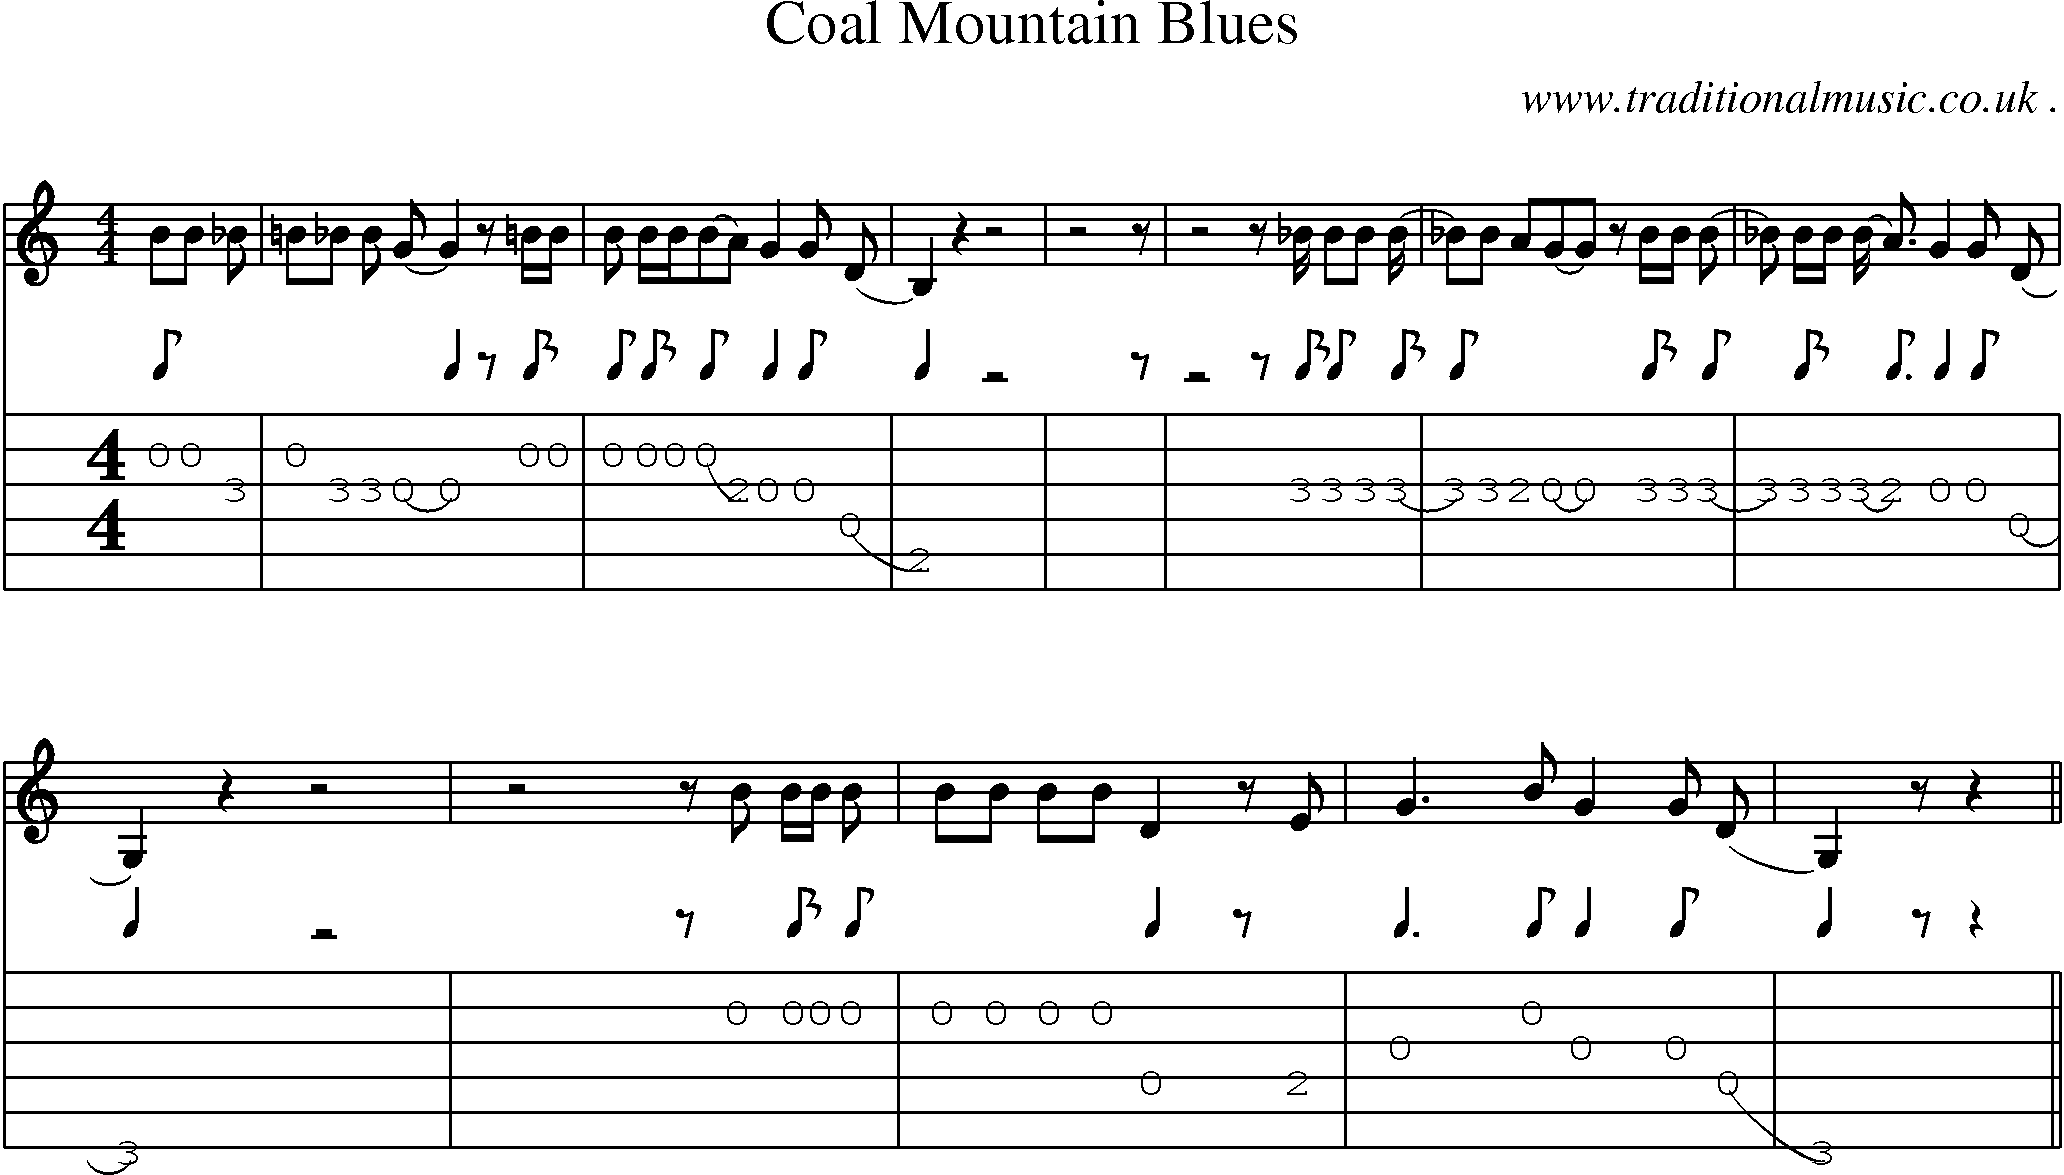 Music Score and Guitar Tabs for Coal Mountain Blues